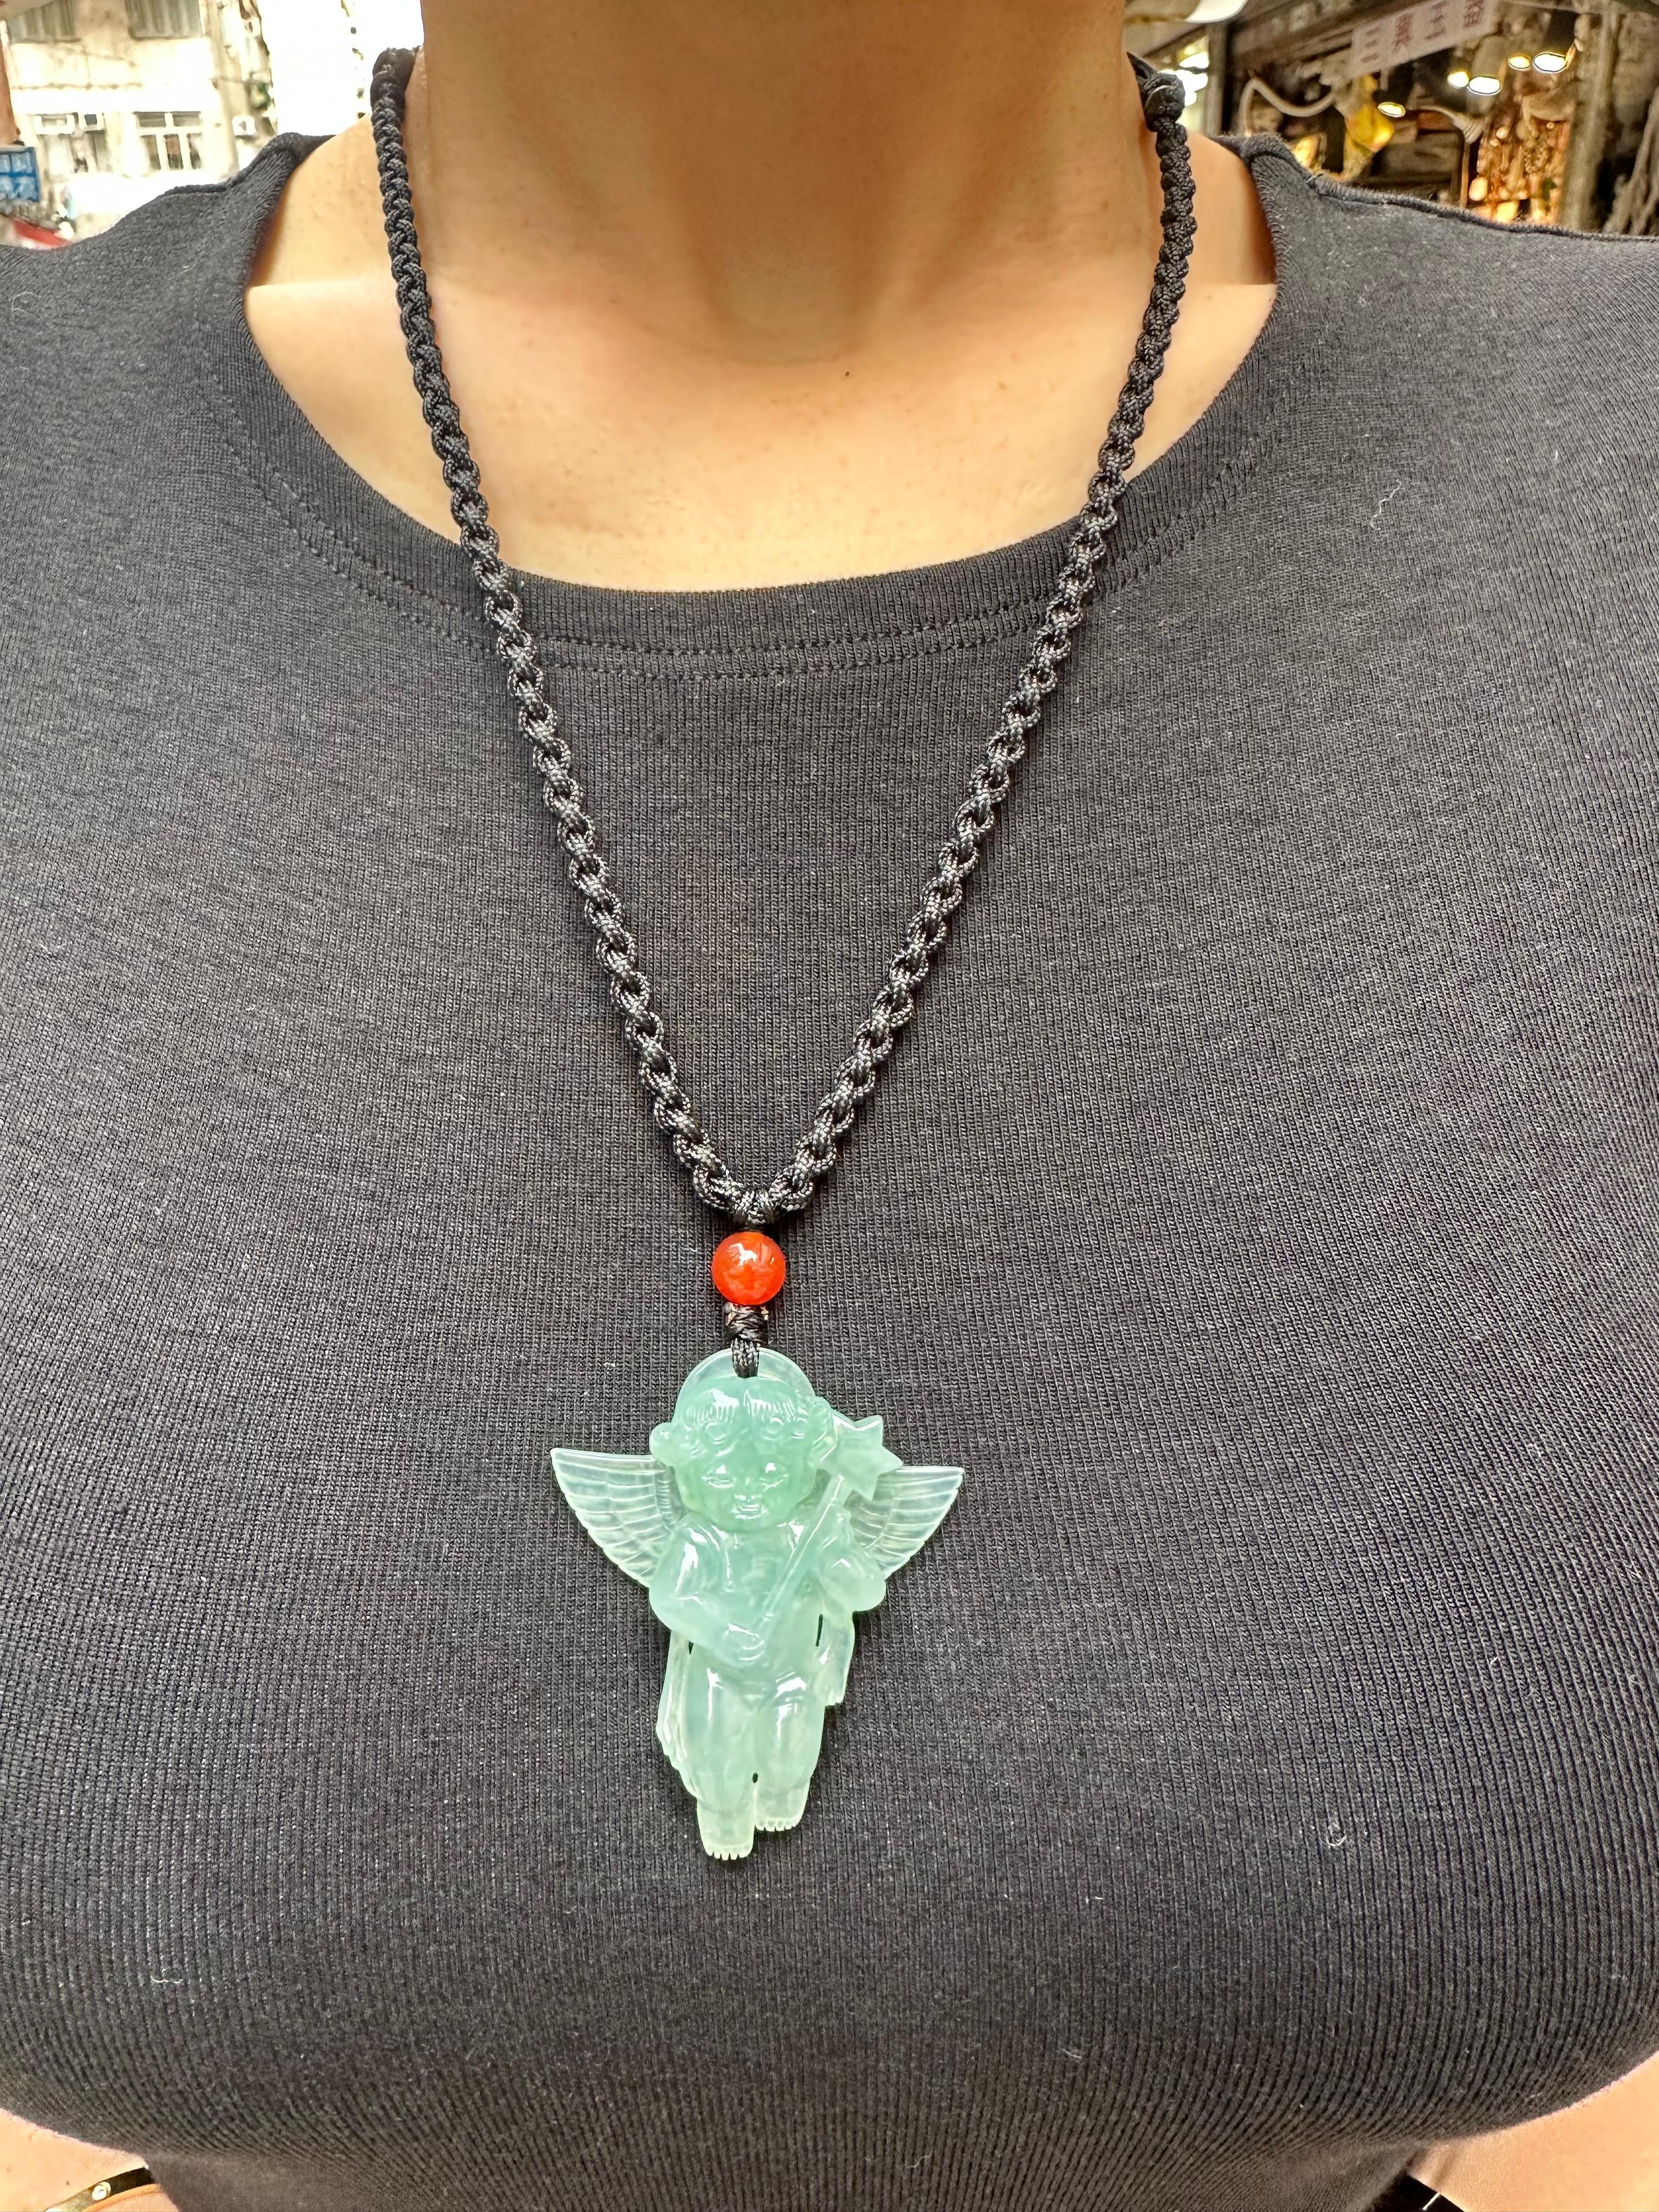 Certified 100 Carats Natural Icy Green Jade & Agate Angel Pendant Necklace, XXL For Sale 3